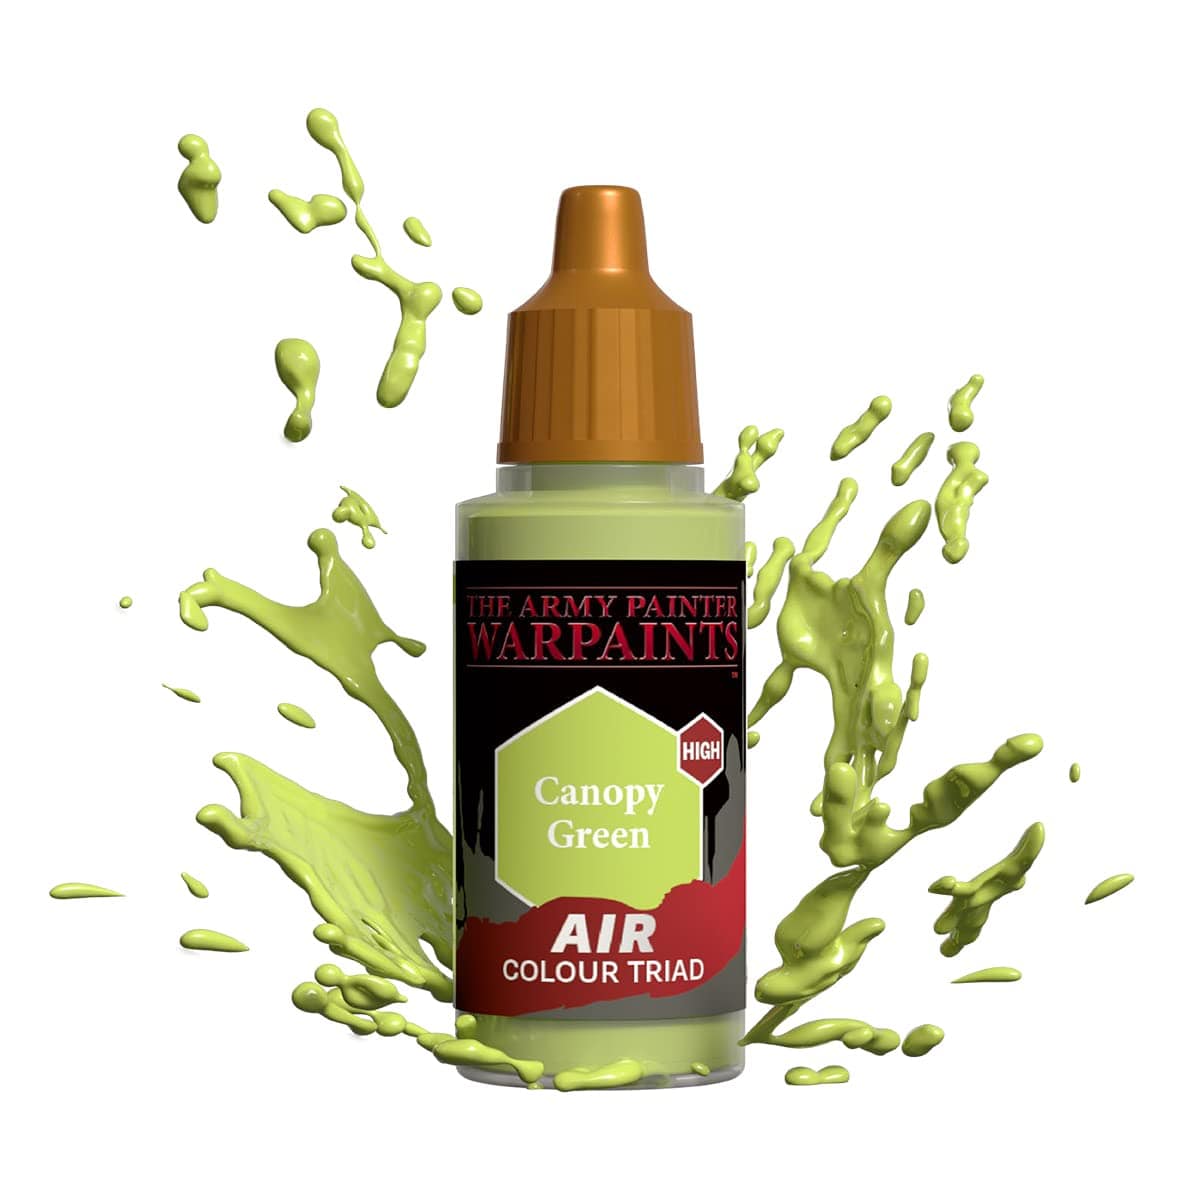 The Army Painter Warpaints Air: Canopy Green 18ml - Lost City Toys